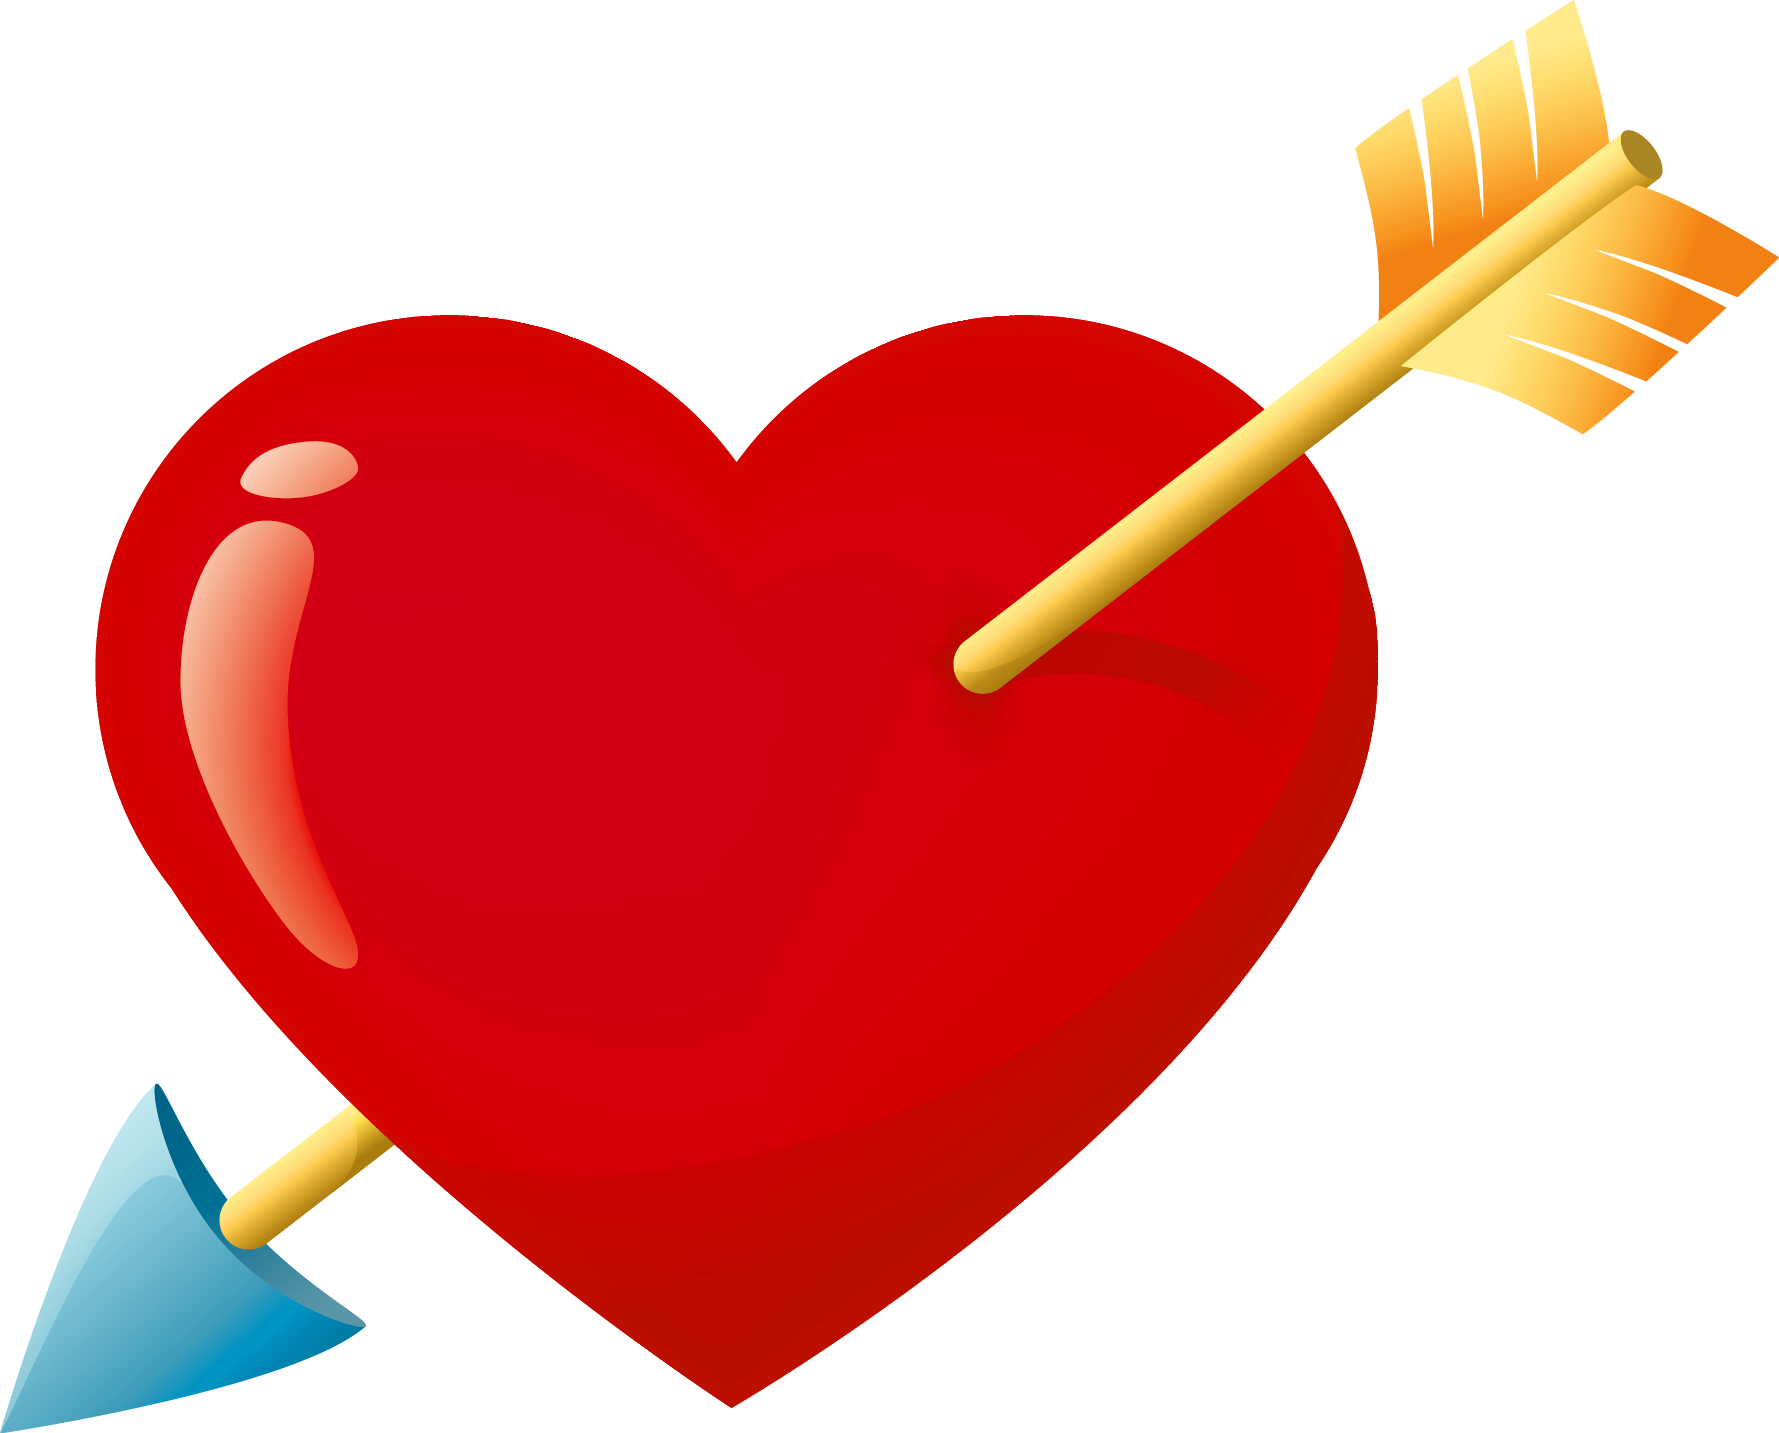 Red Heart Clip Art - Cliparts.co